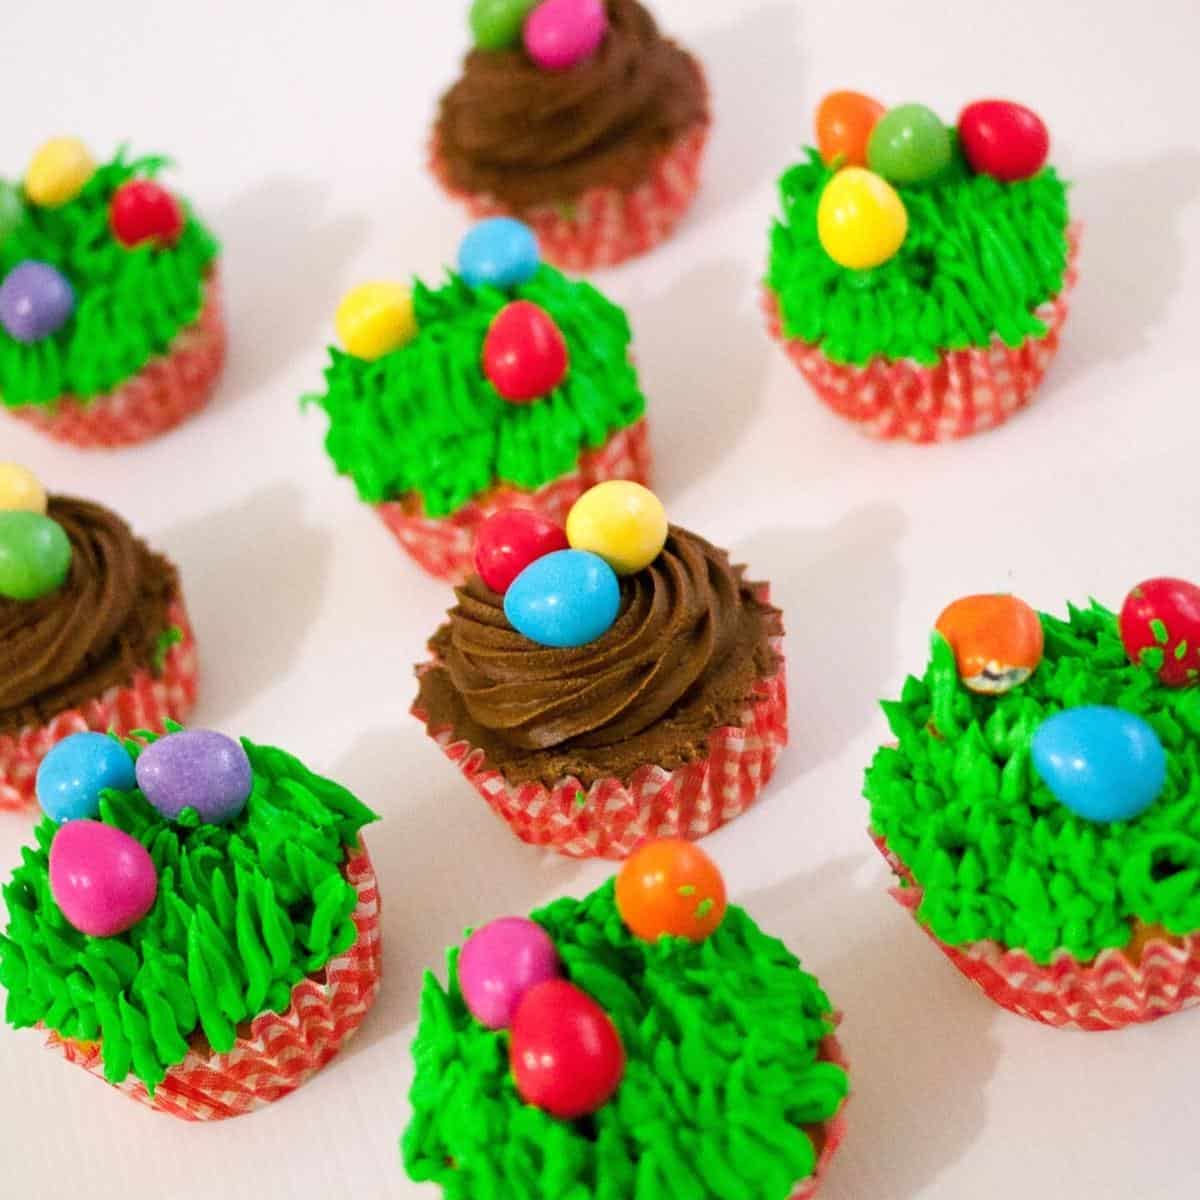 Frosted carrot cupcakes for easter with candy eggs.